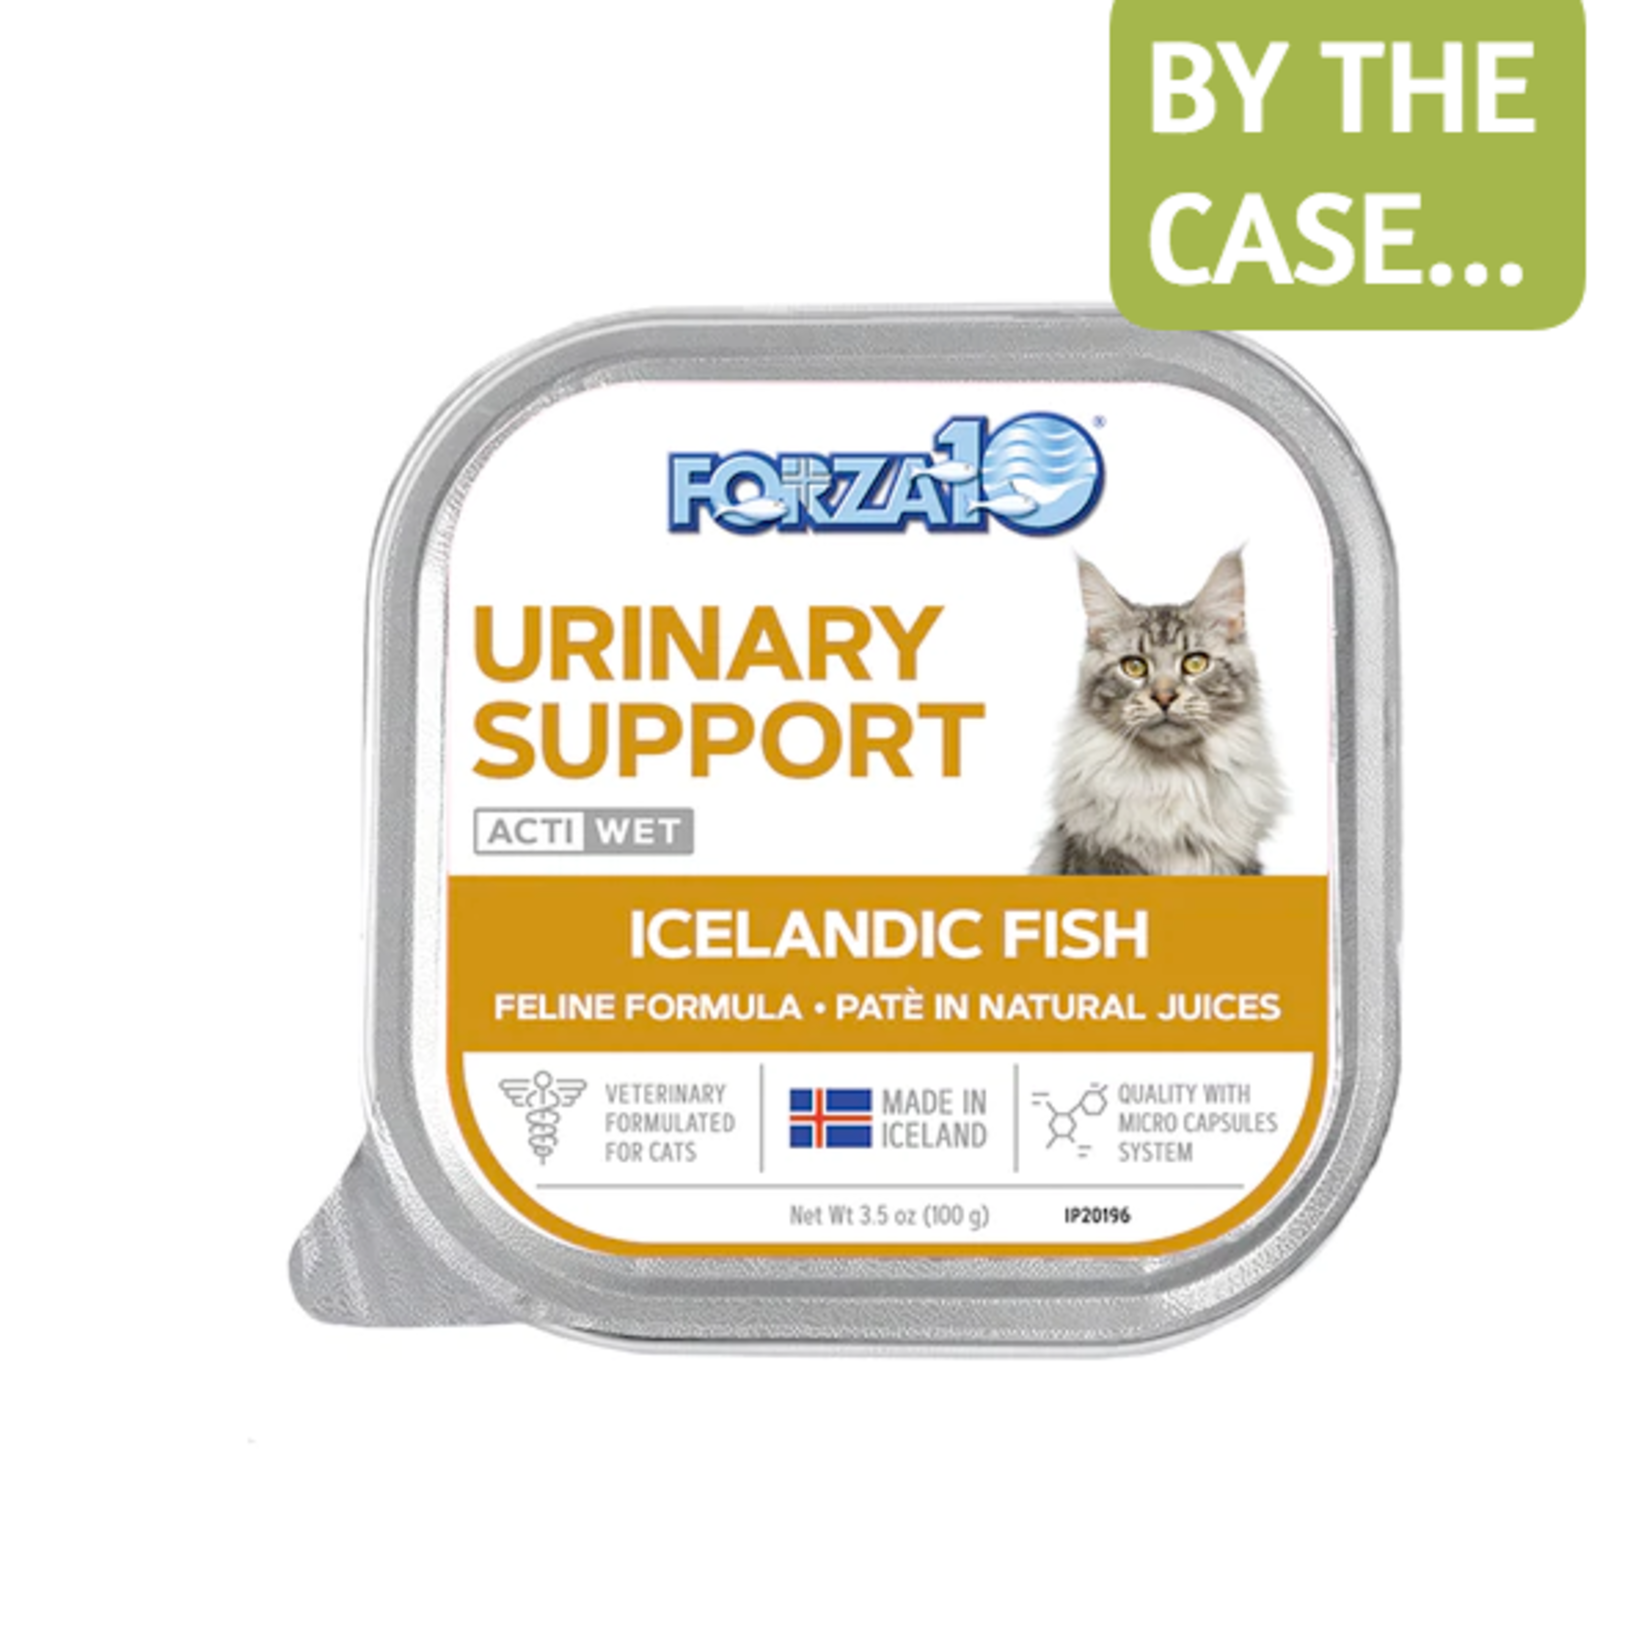 Forza10 Forza10 Nutraceutic Wet Cat Food ActiWet Urinary Support Fish Formula 3.5oz